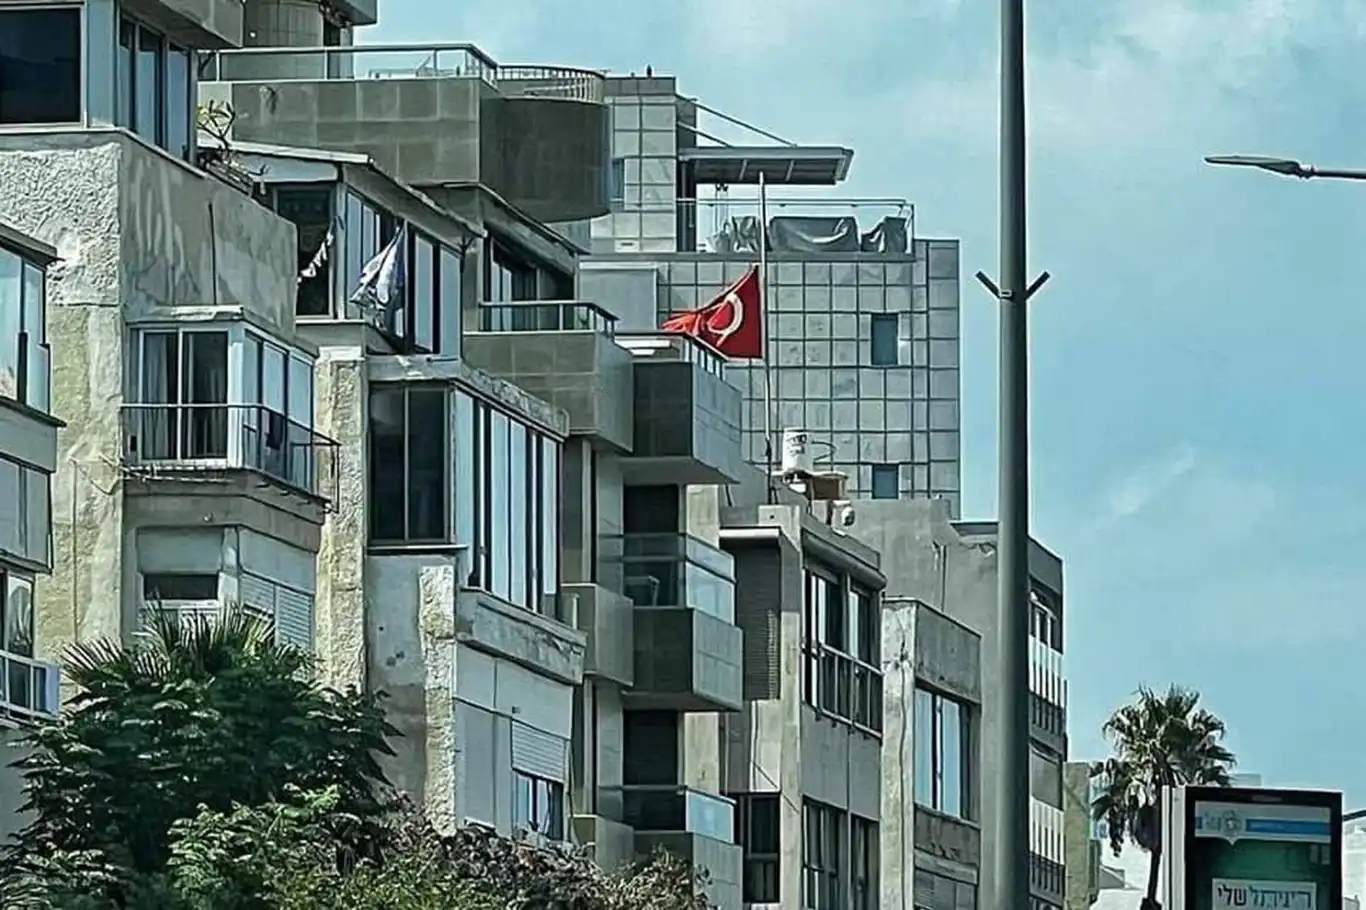 Türkiye lowers flags at diplomatic missions in Tel Aviv and Jerusalem in mourning for Haniyeh